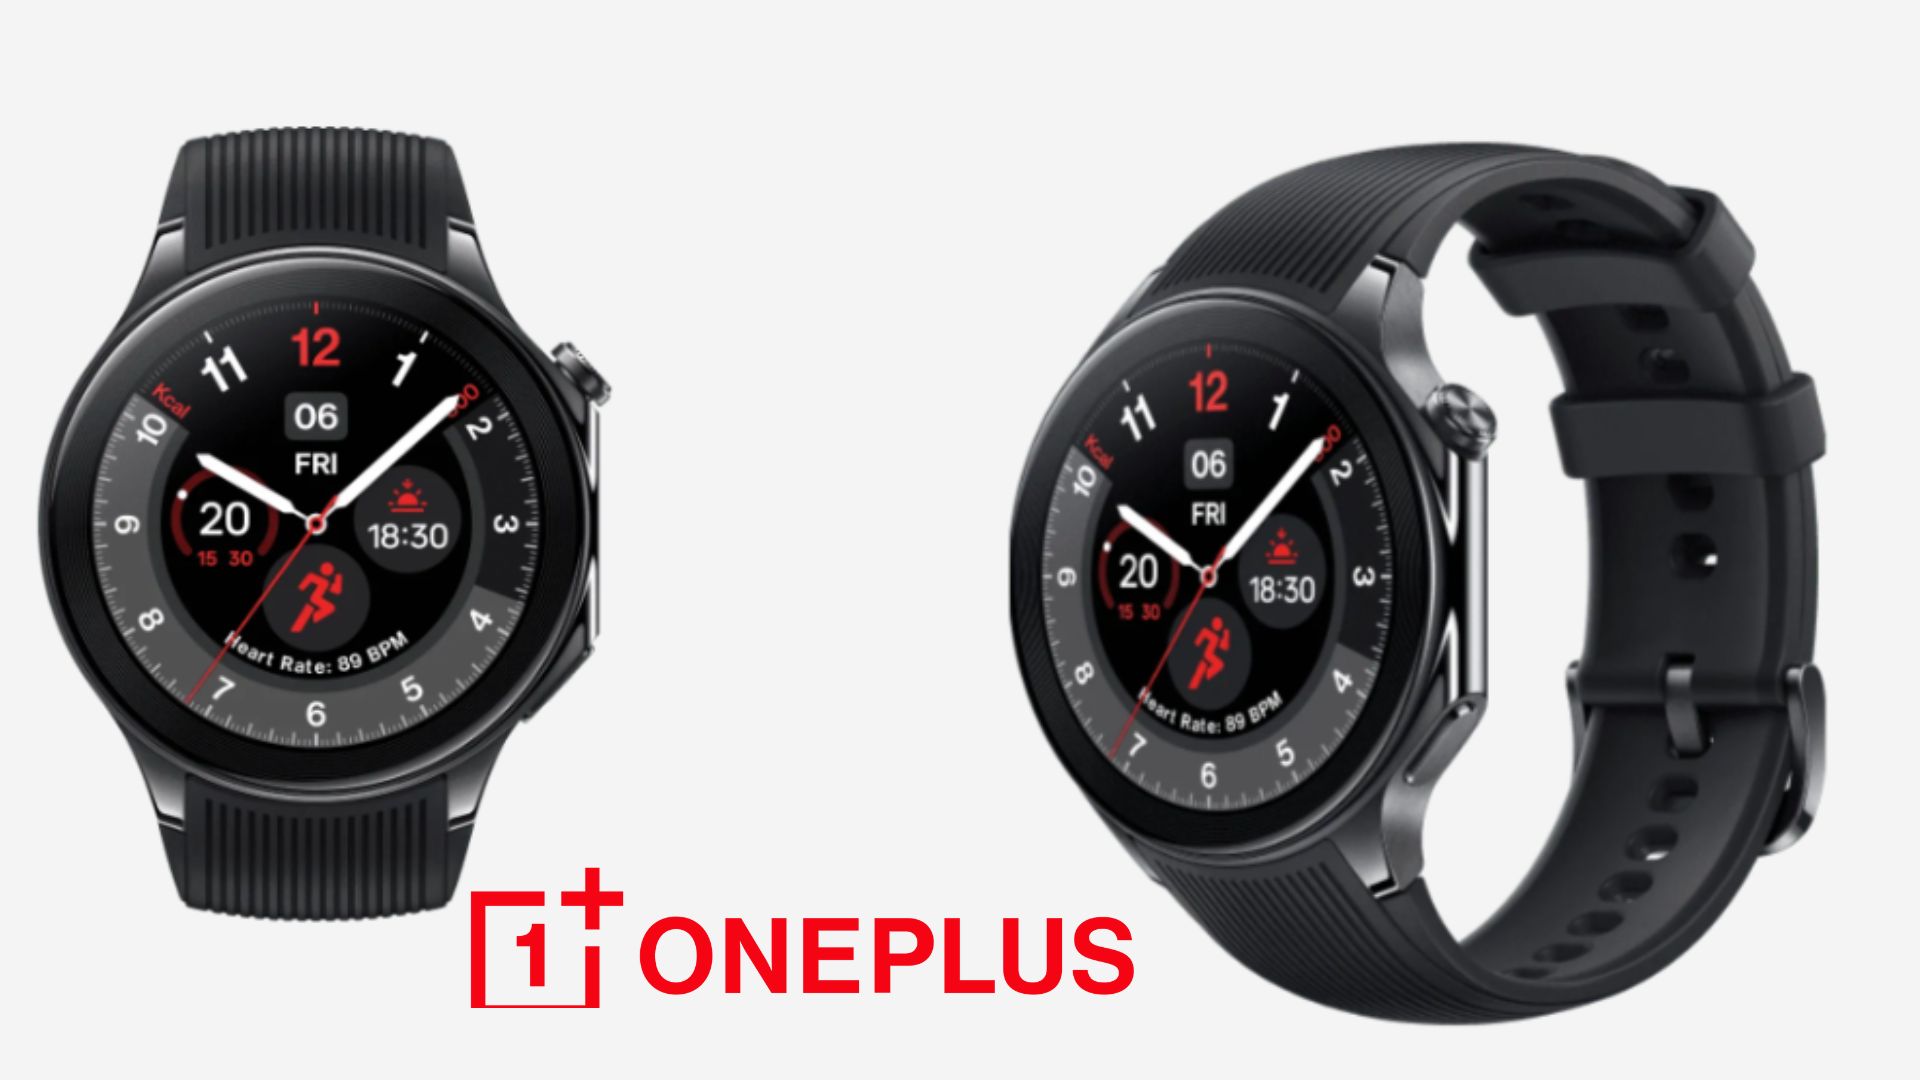 This Watch Lasts Up to 100 Hours? OnePlus Watch 2- What Else to Expect?